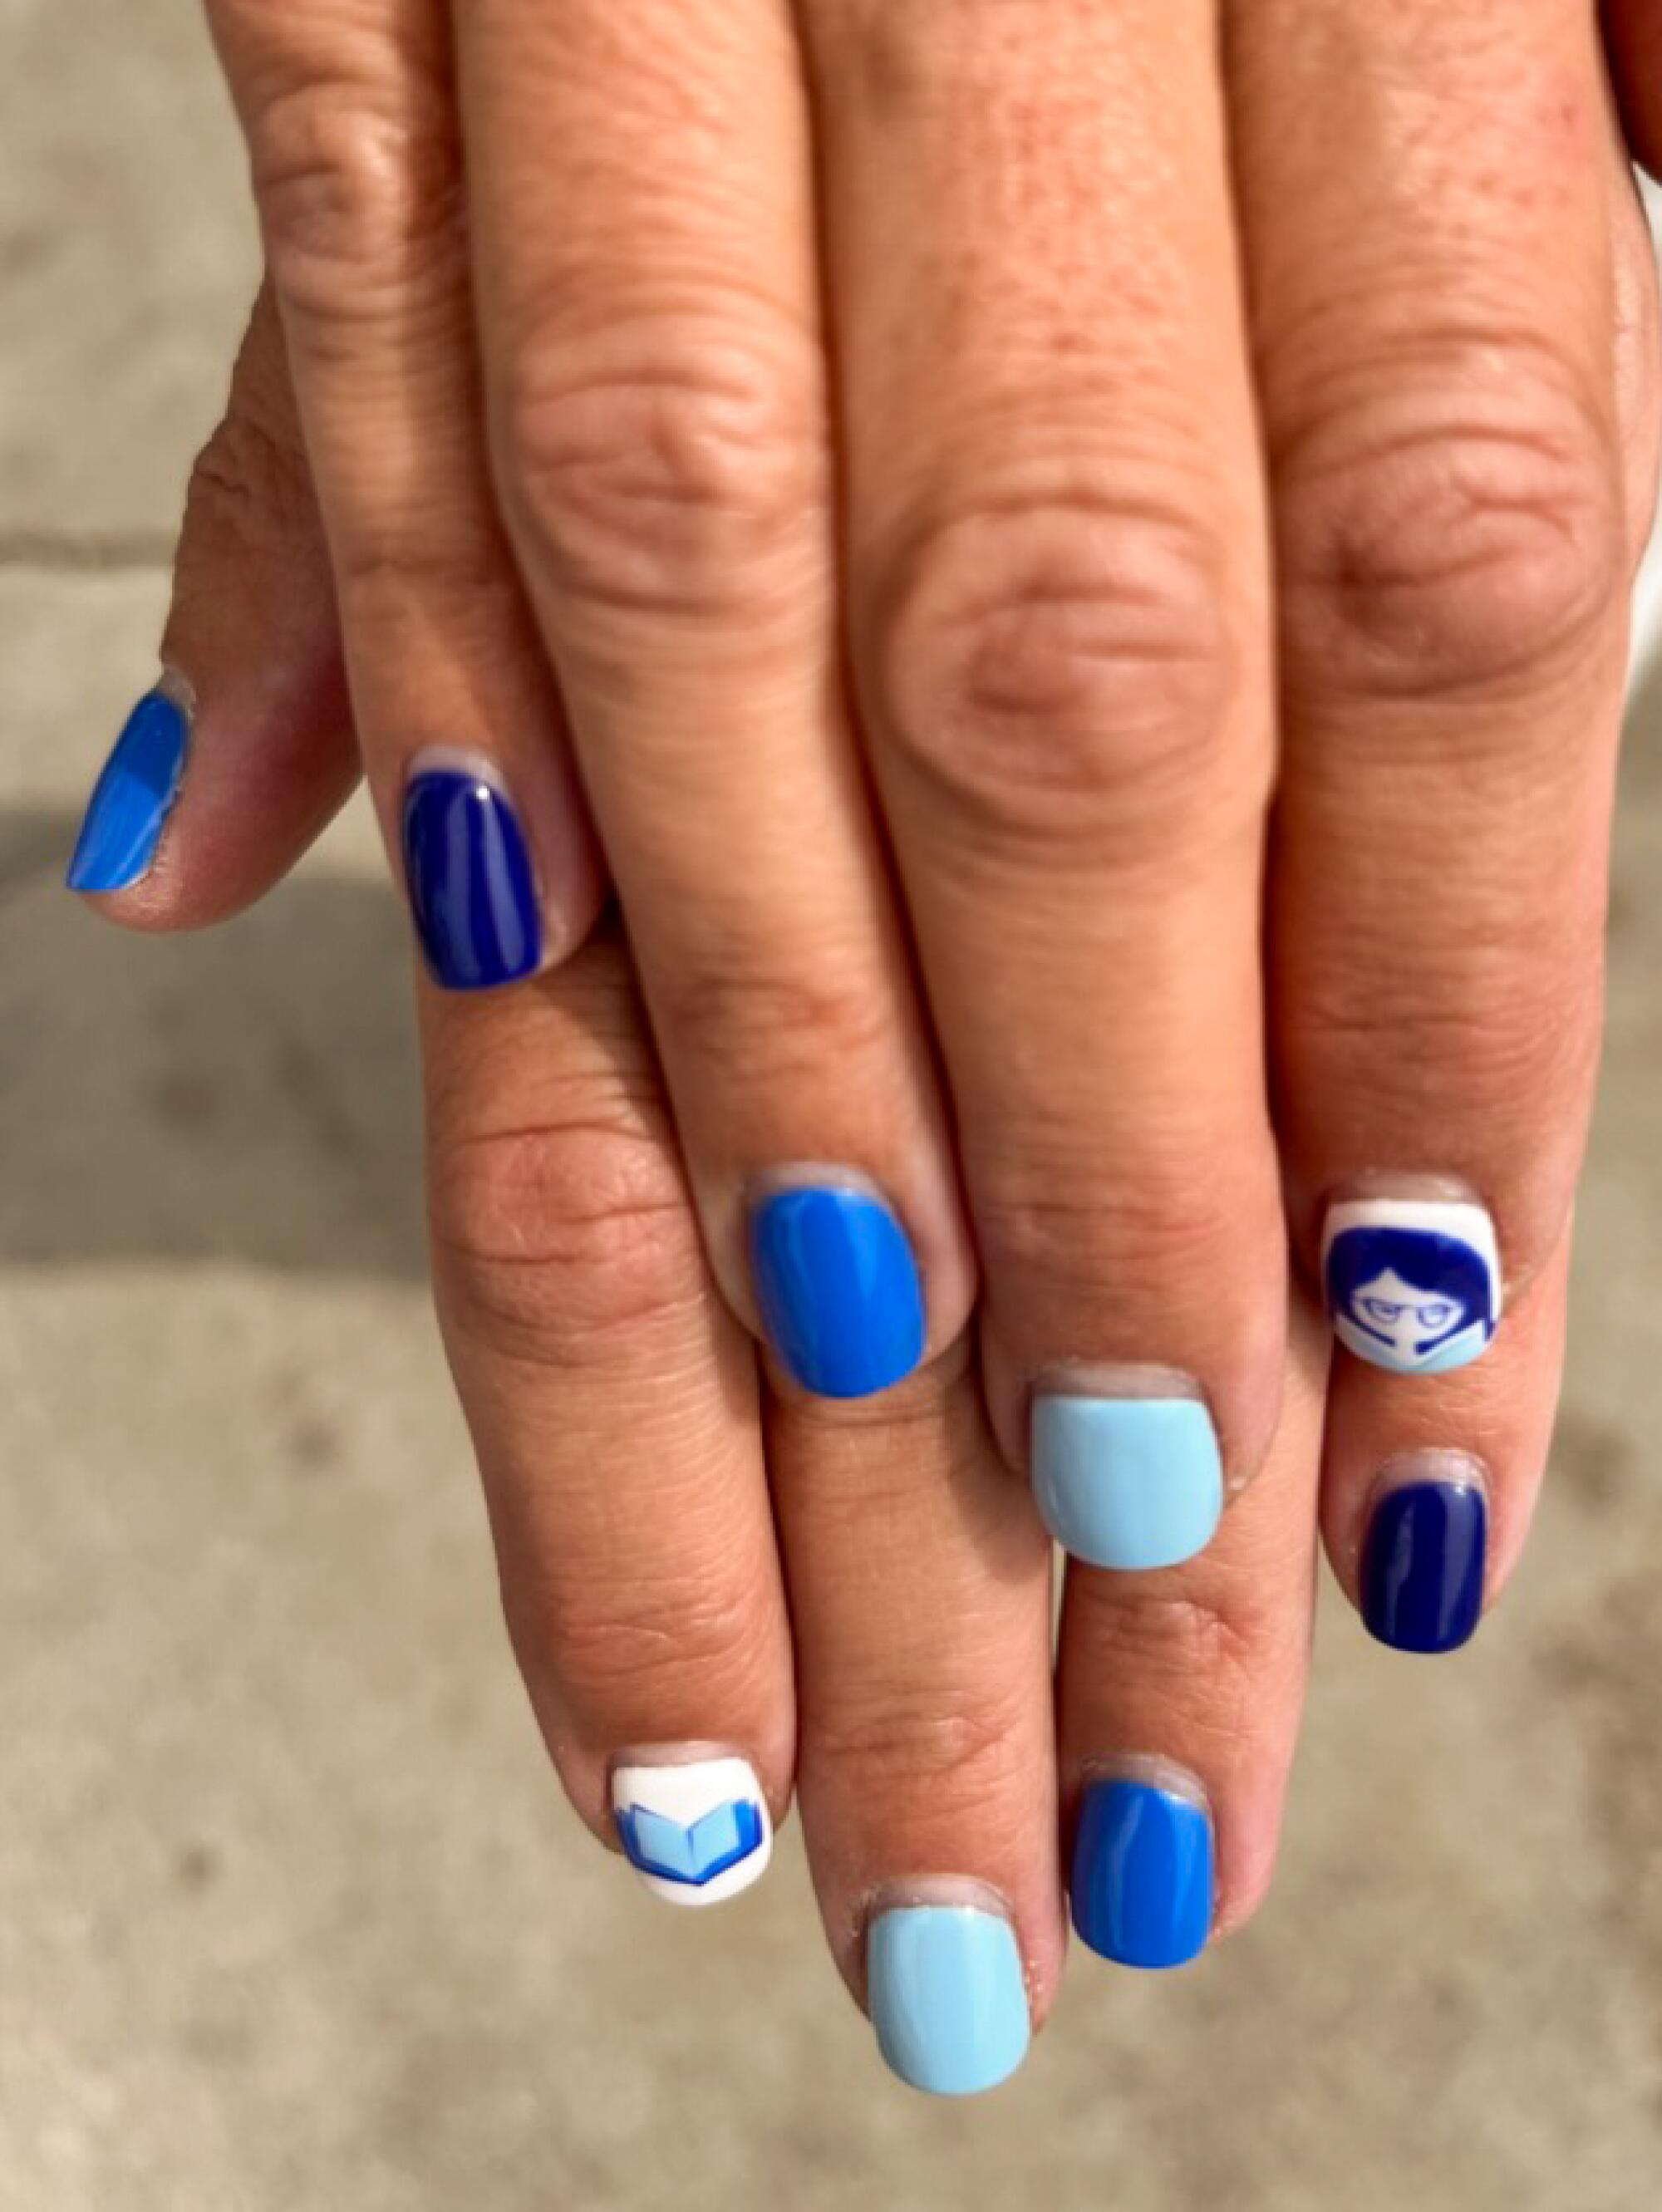 A guest's nails painted with Zibby Owens' podcast logo.